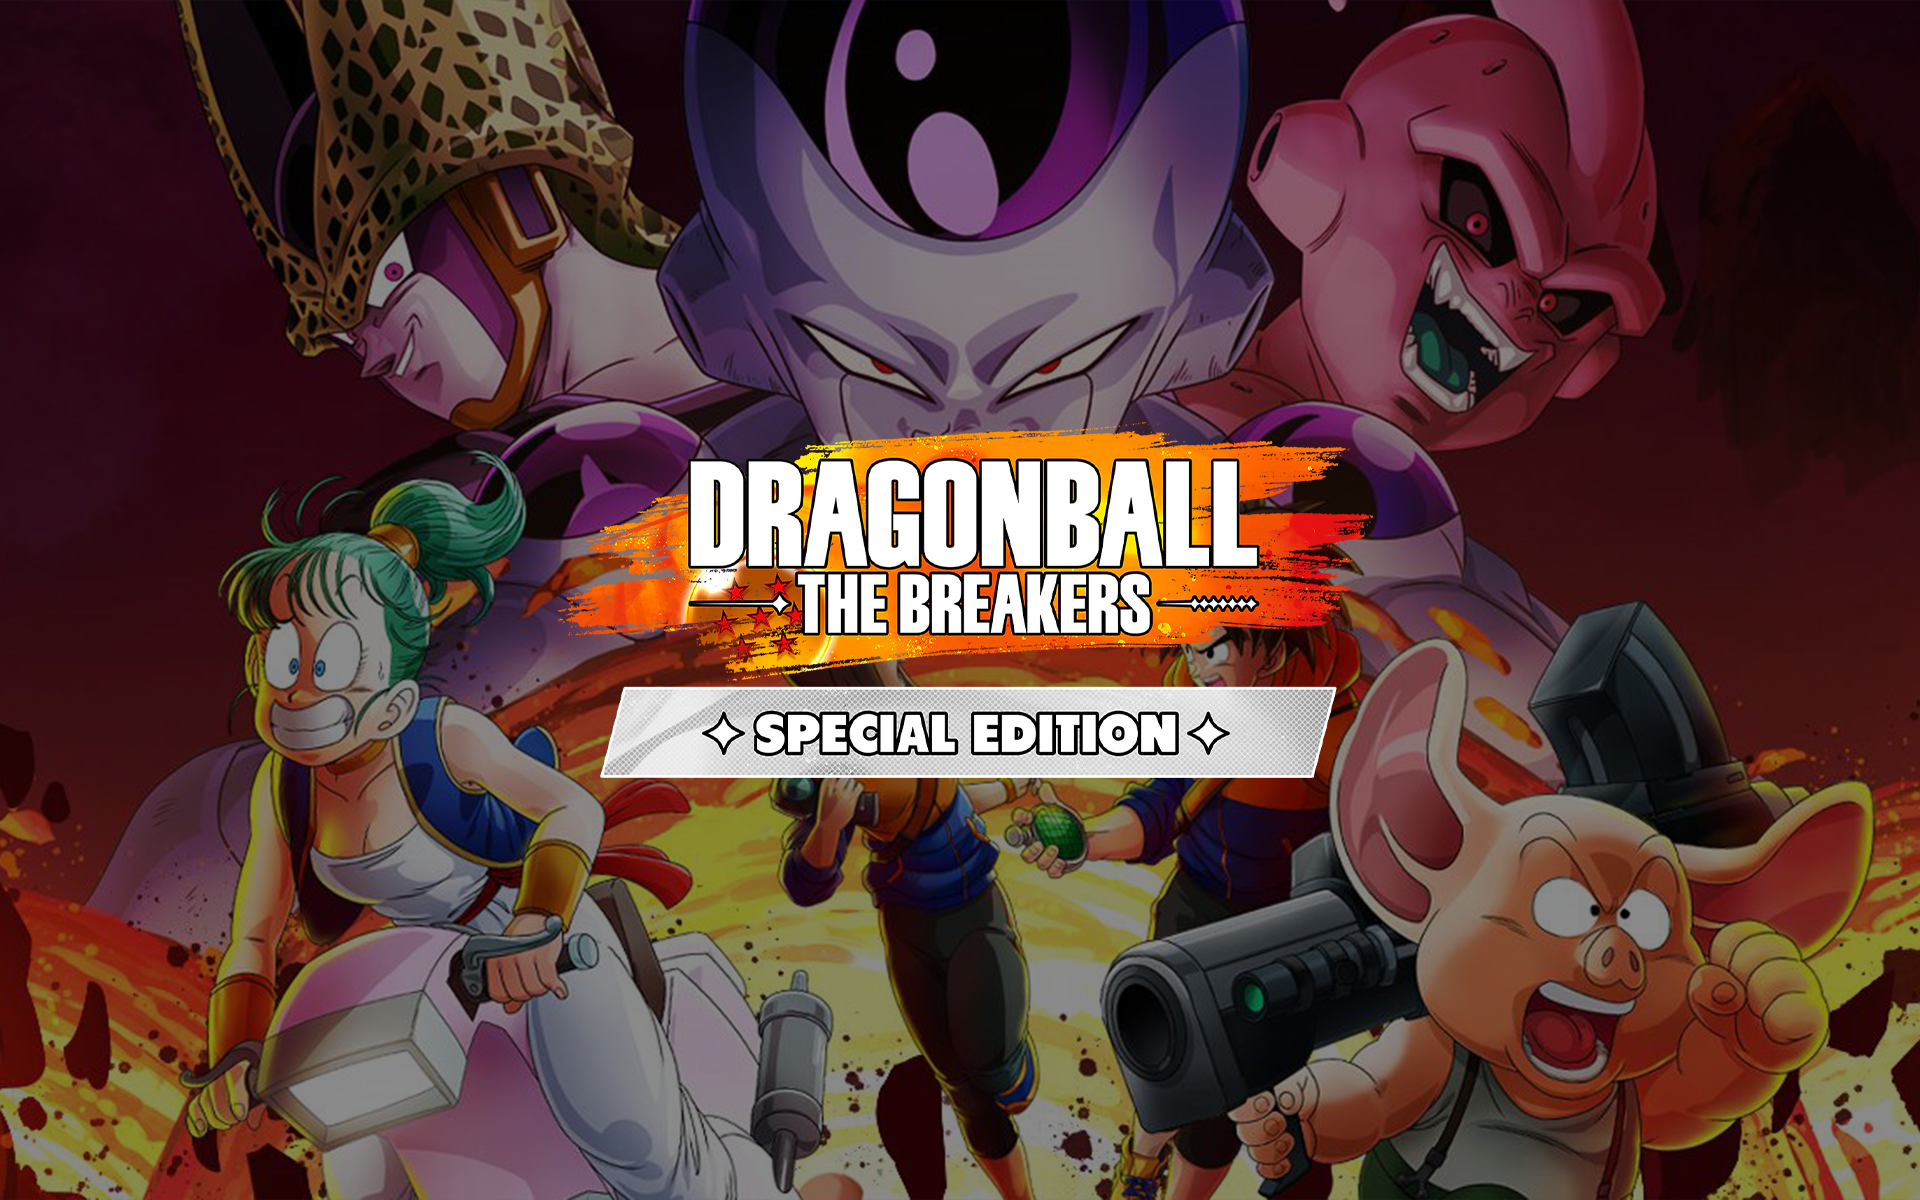 Buy DRAGON BALL: THE BREAKERS Special Edition